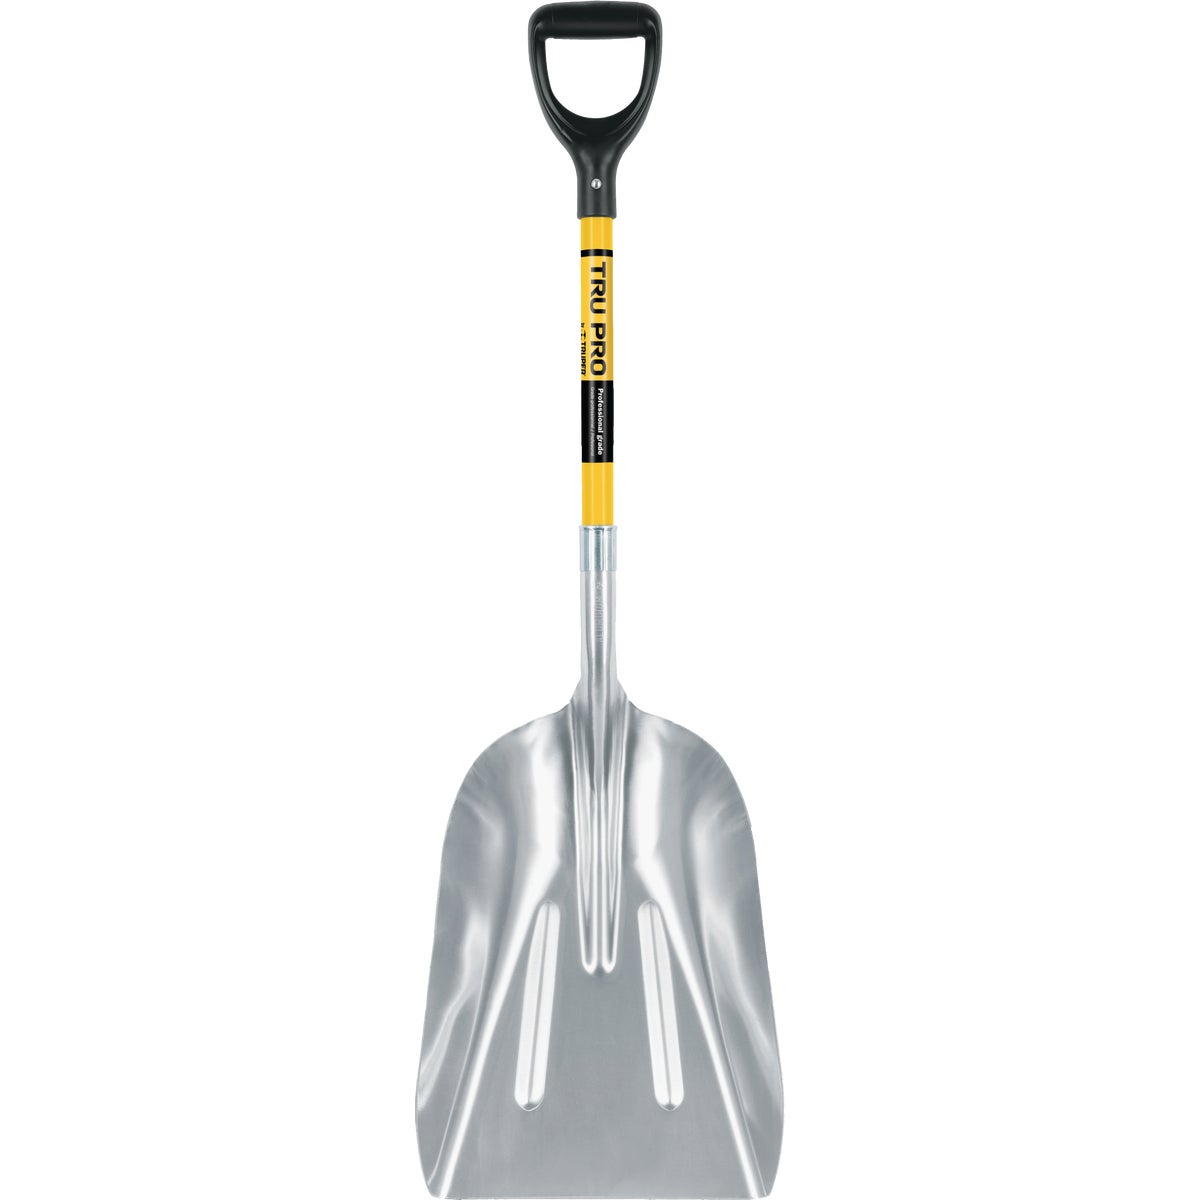 Item 702397, #12 aluminum scoop shovel is ideal for moving and scooping grain, seed, 